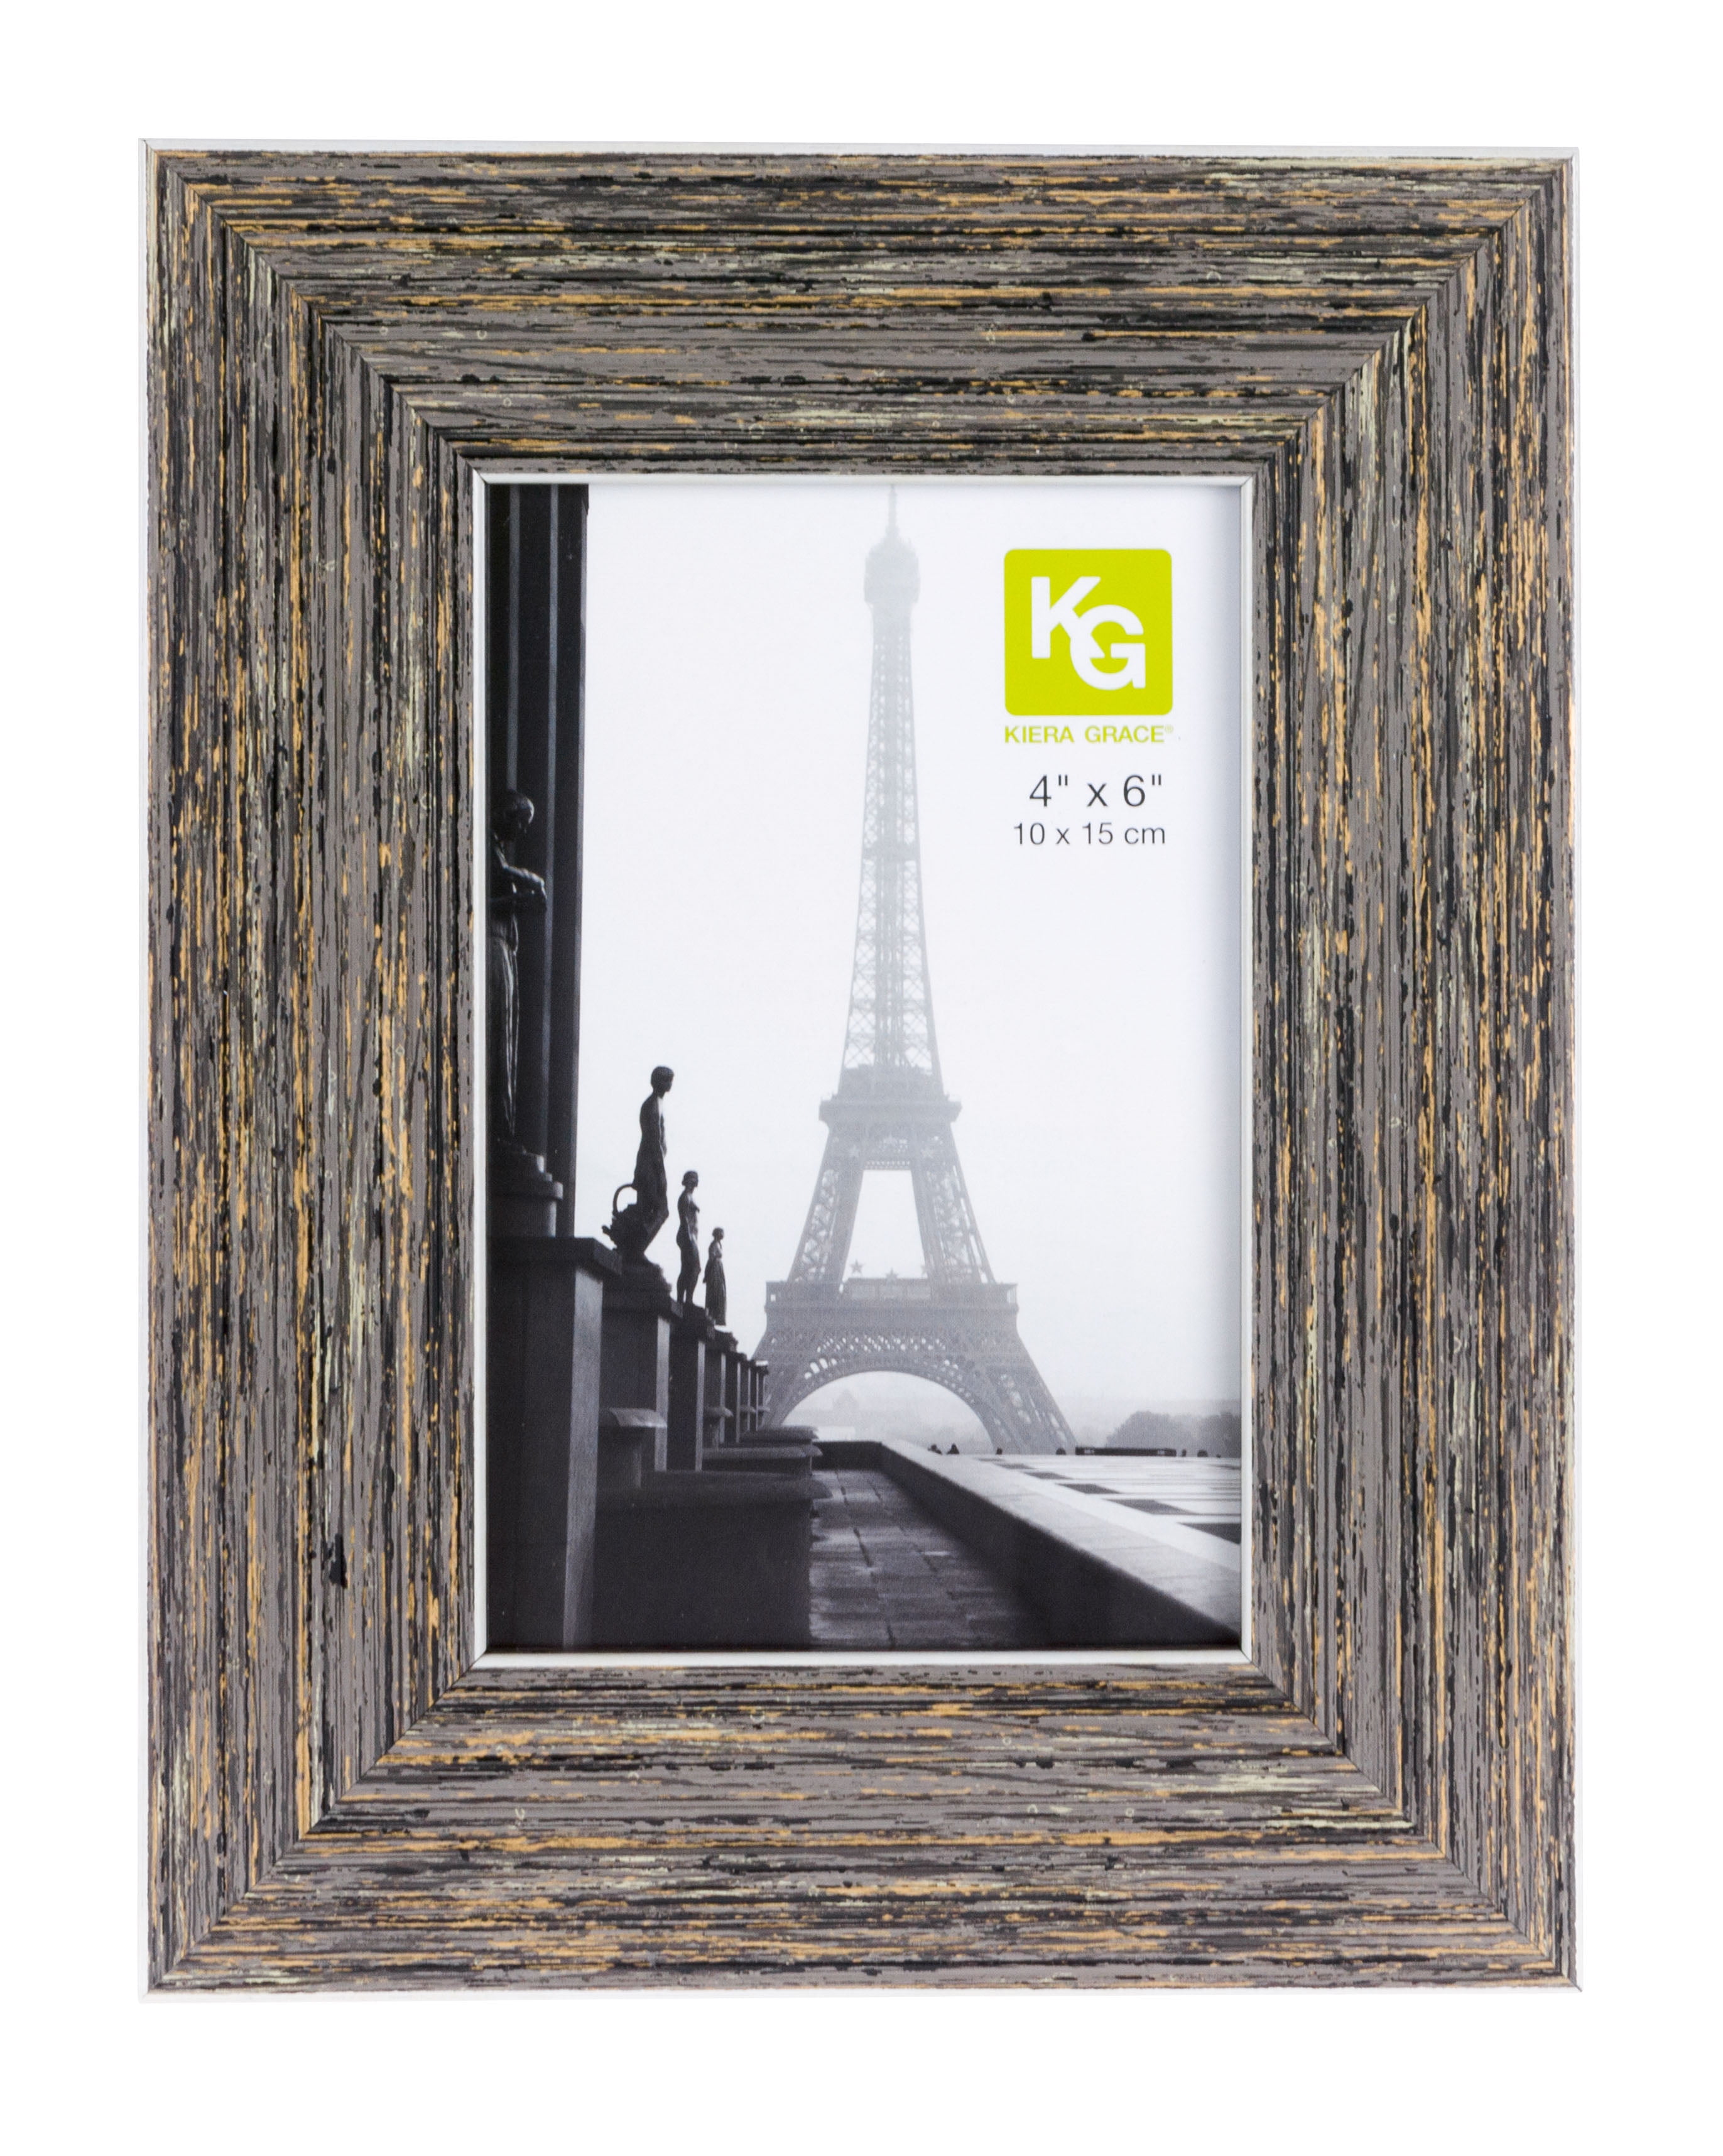 Plastic Resin 4 by 6-Inch kieragrace Emery Picture Frame Weathered Barnwood Finish